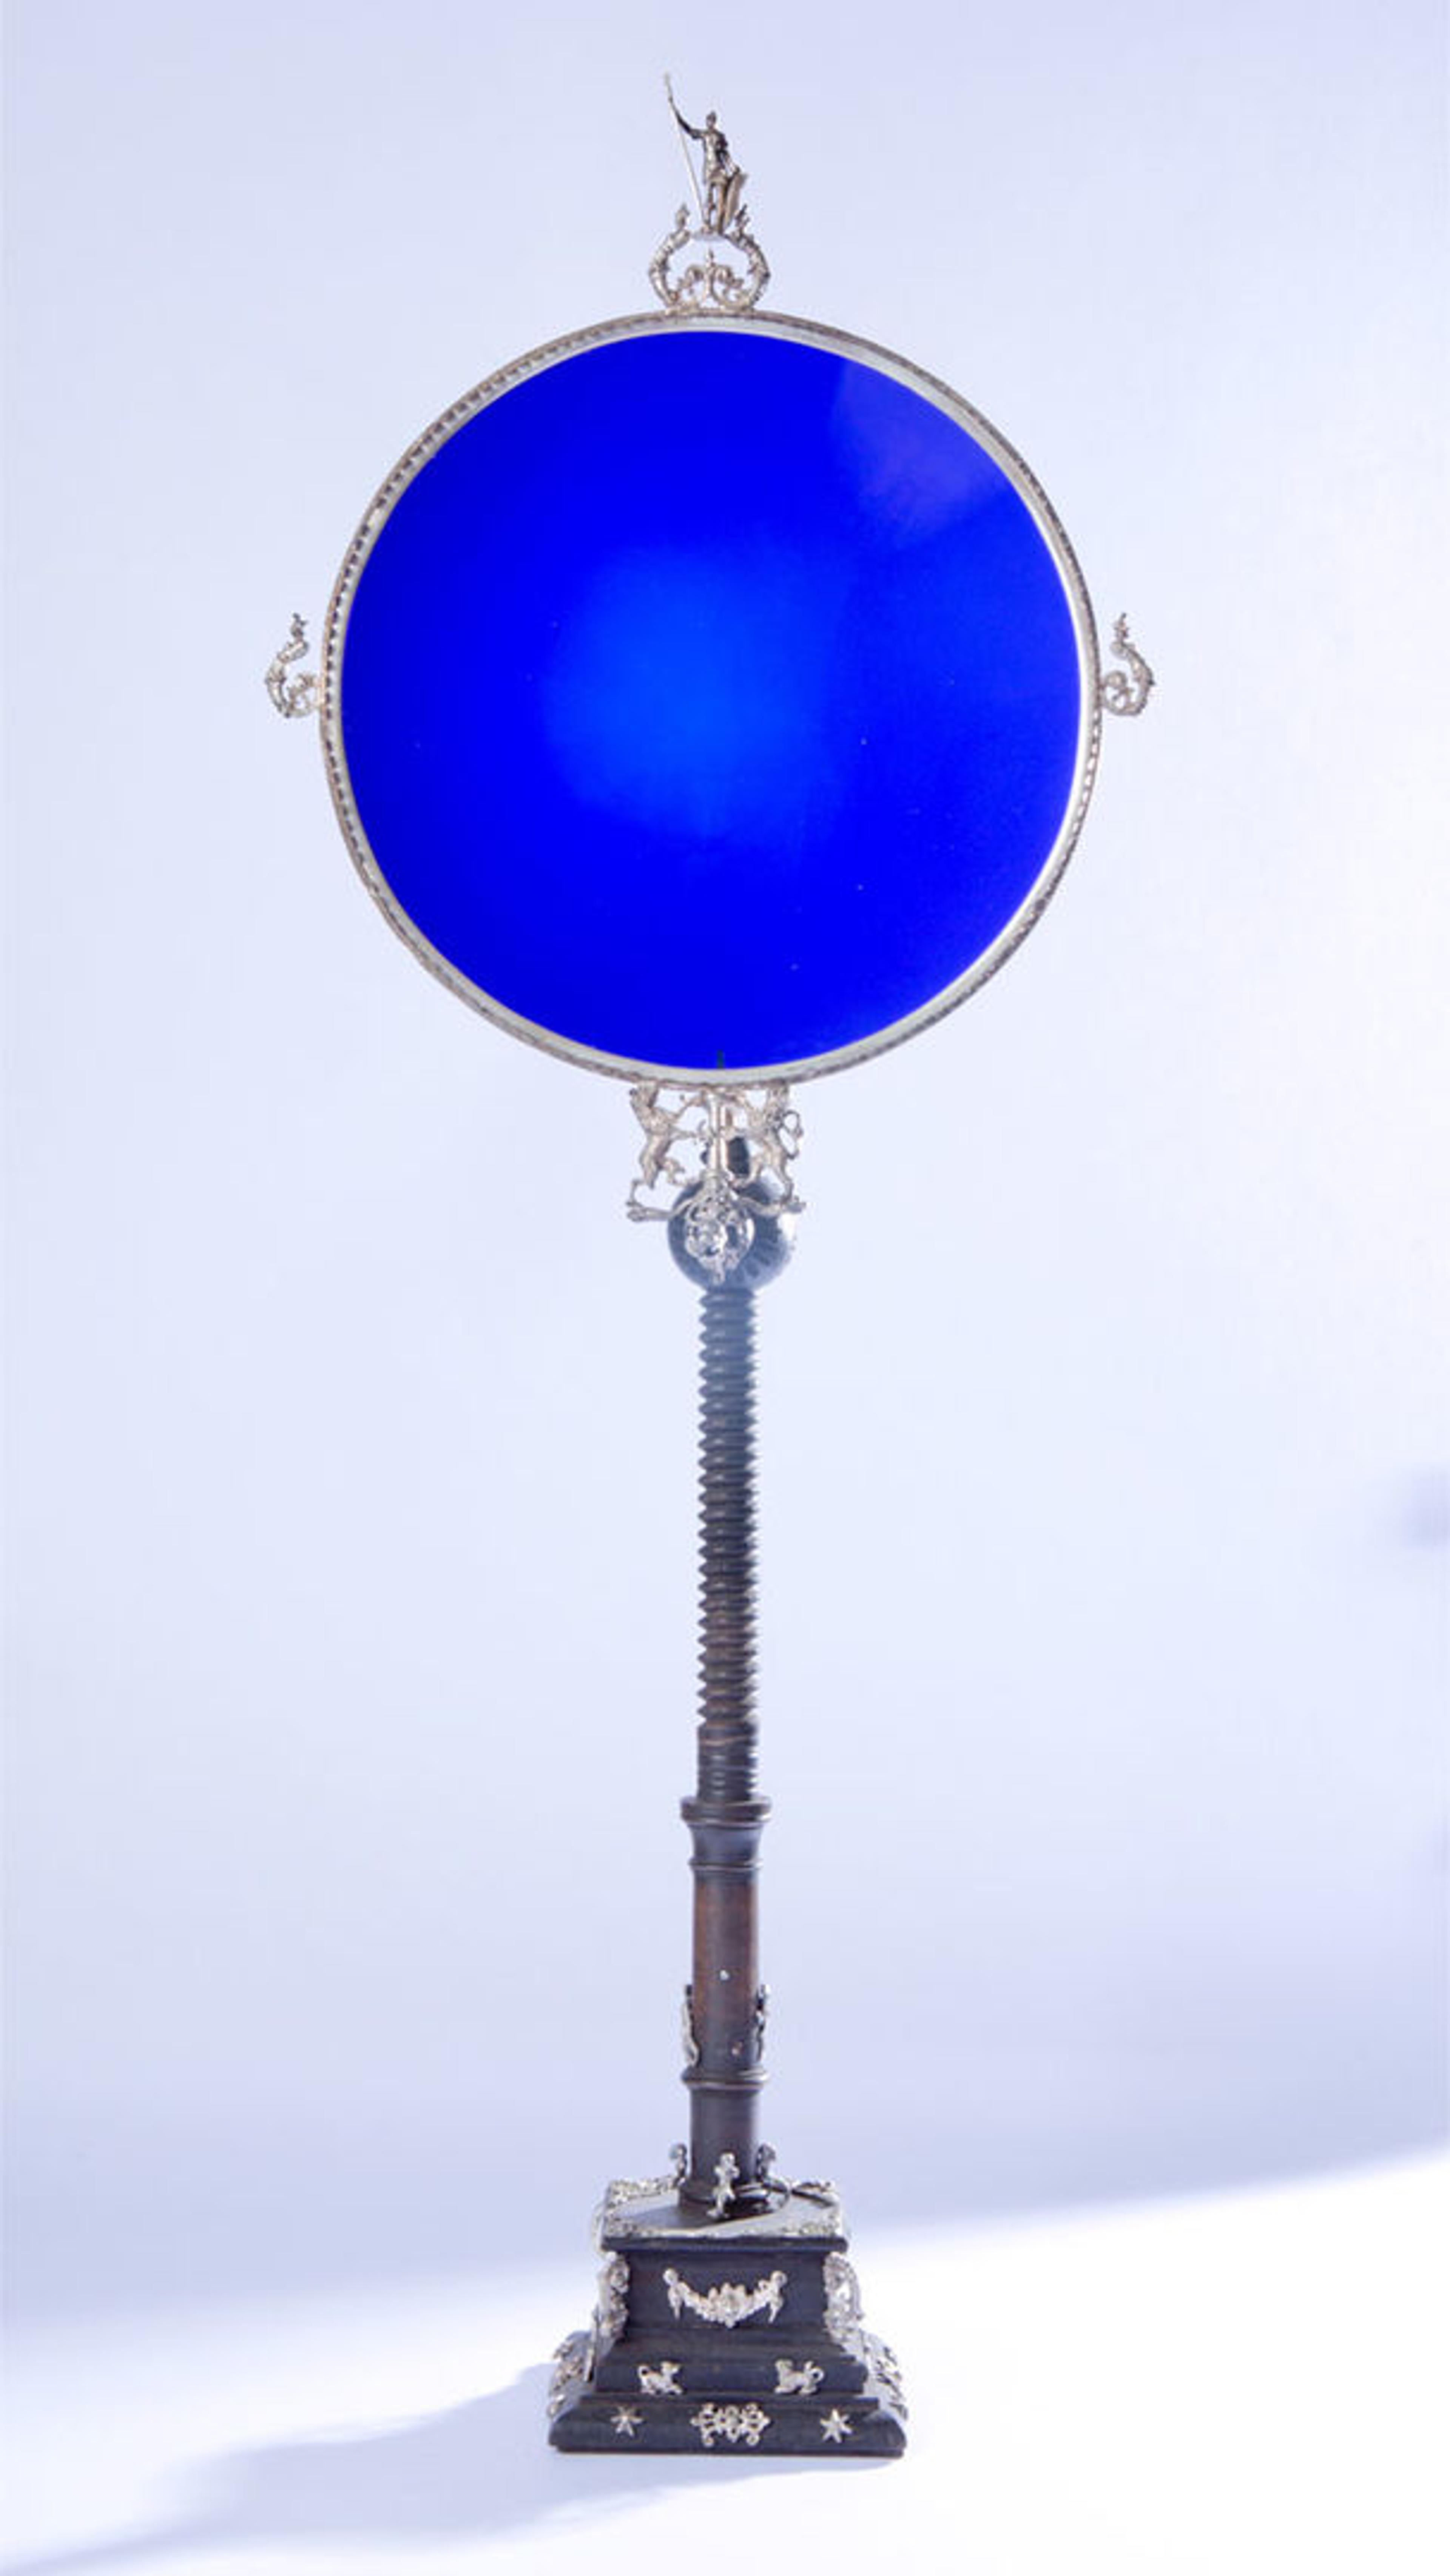 A solar observation shield with blue glass on pearwood stand with figures carved in silver